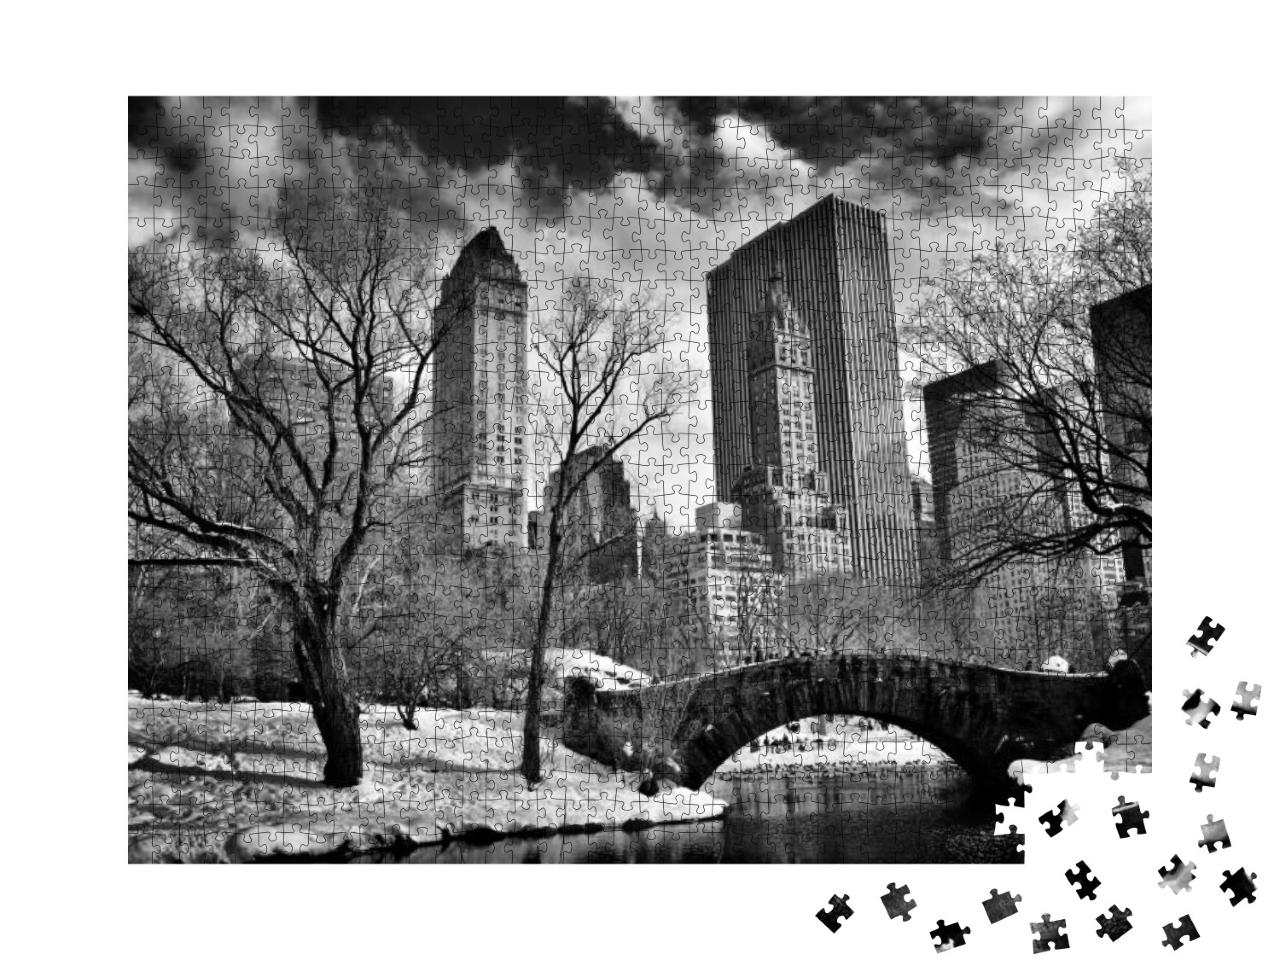 New York City - Central Park in Winter -Gapstow Bridge... Jigsaw Puzzle with 1000 pieces